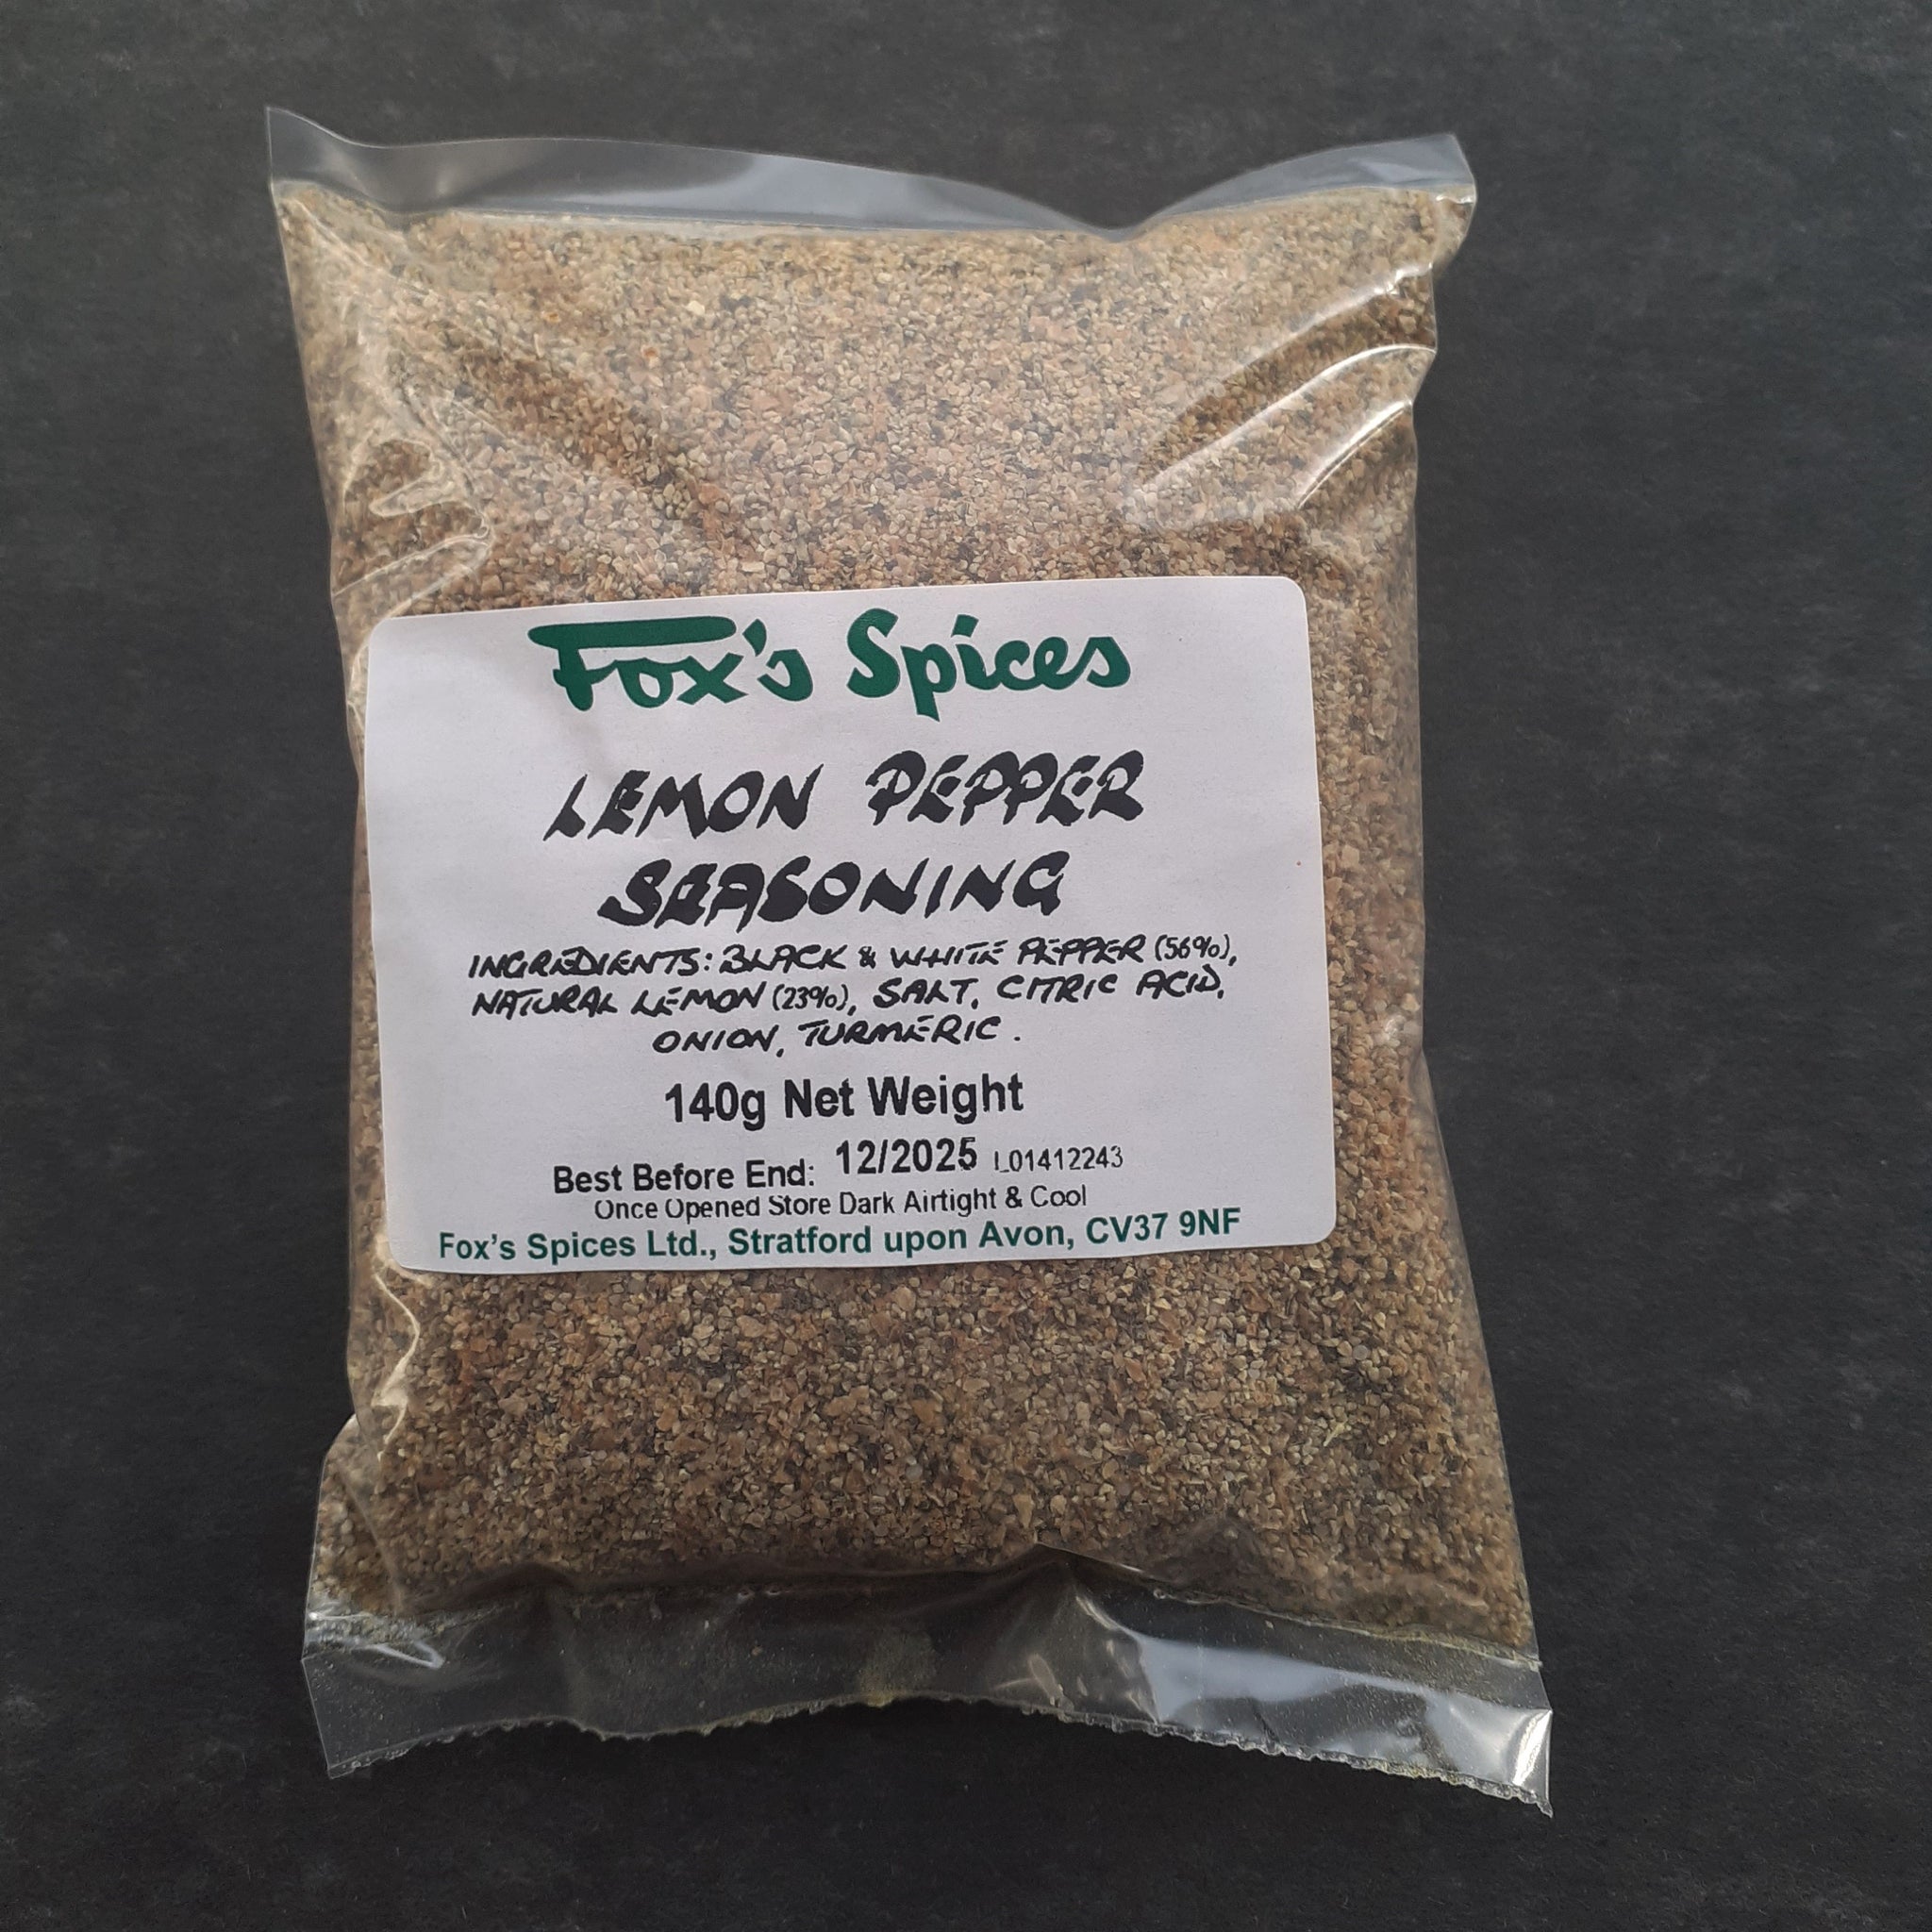 A 140g bag of lemon pepper seasoning supplied by Fox's Spices.